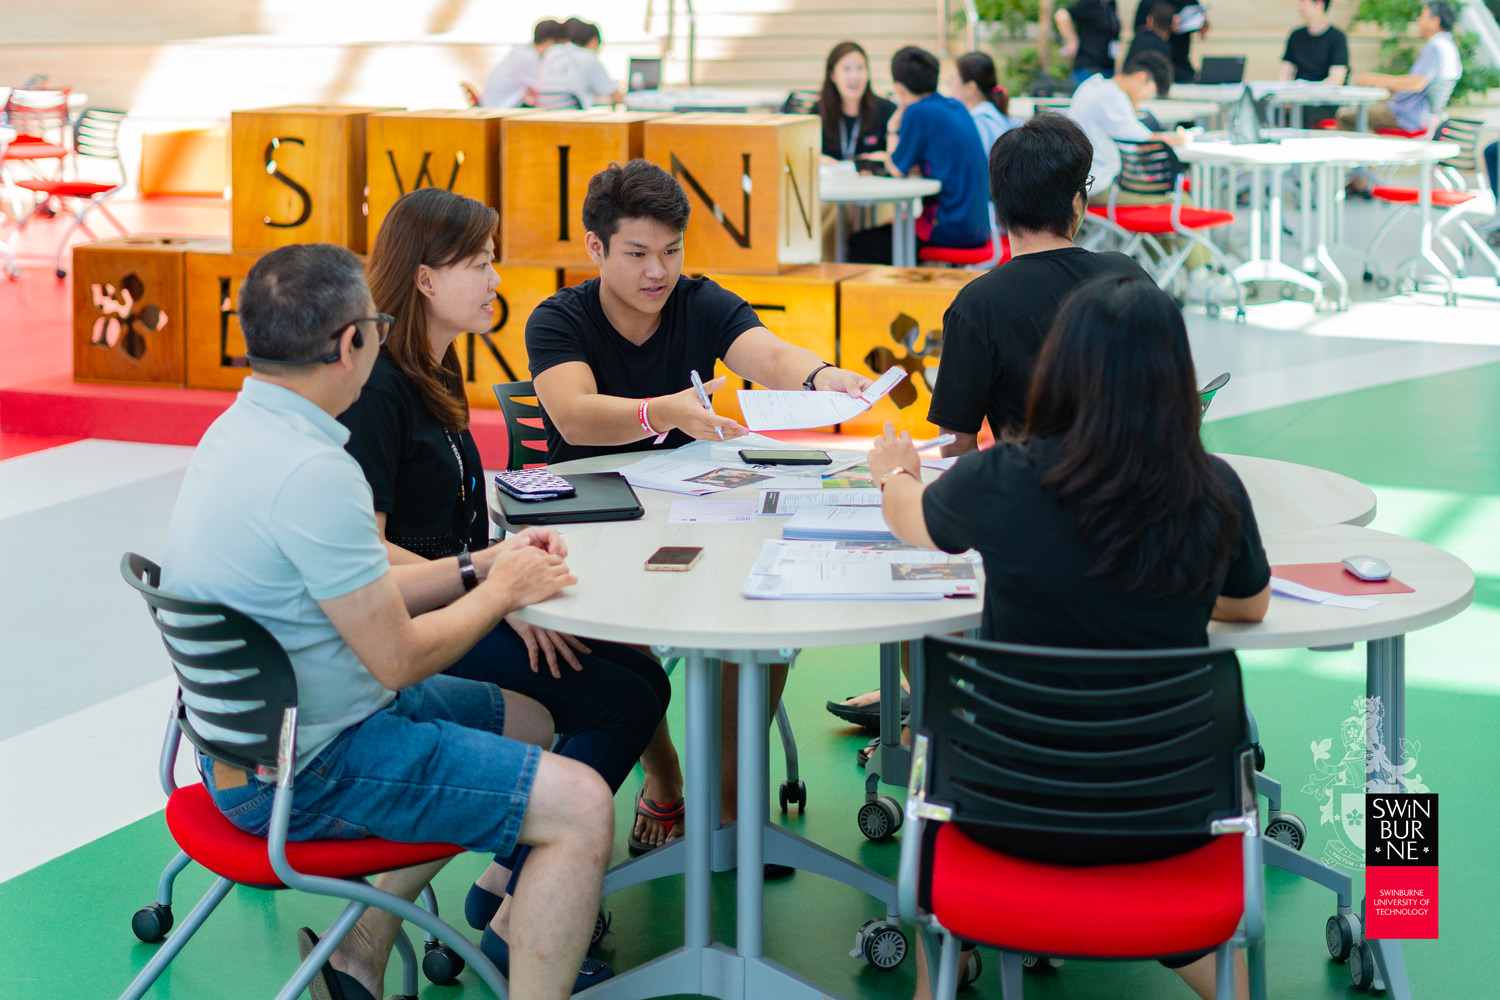 Visit Swinburne Sarawak’s Open Day events in multiple cities on 3 and 4 August